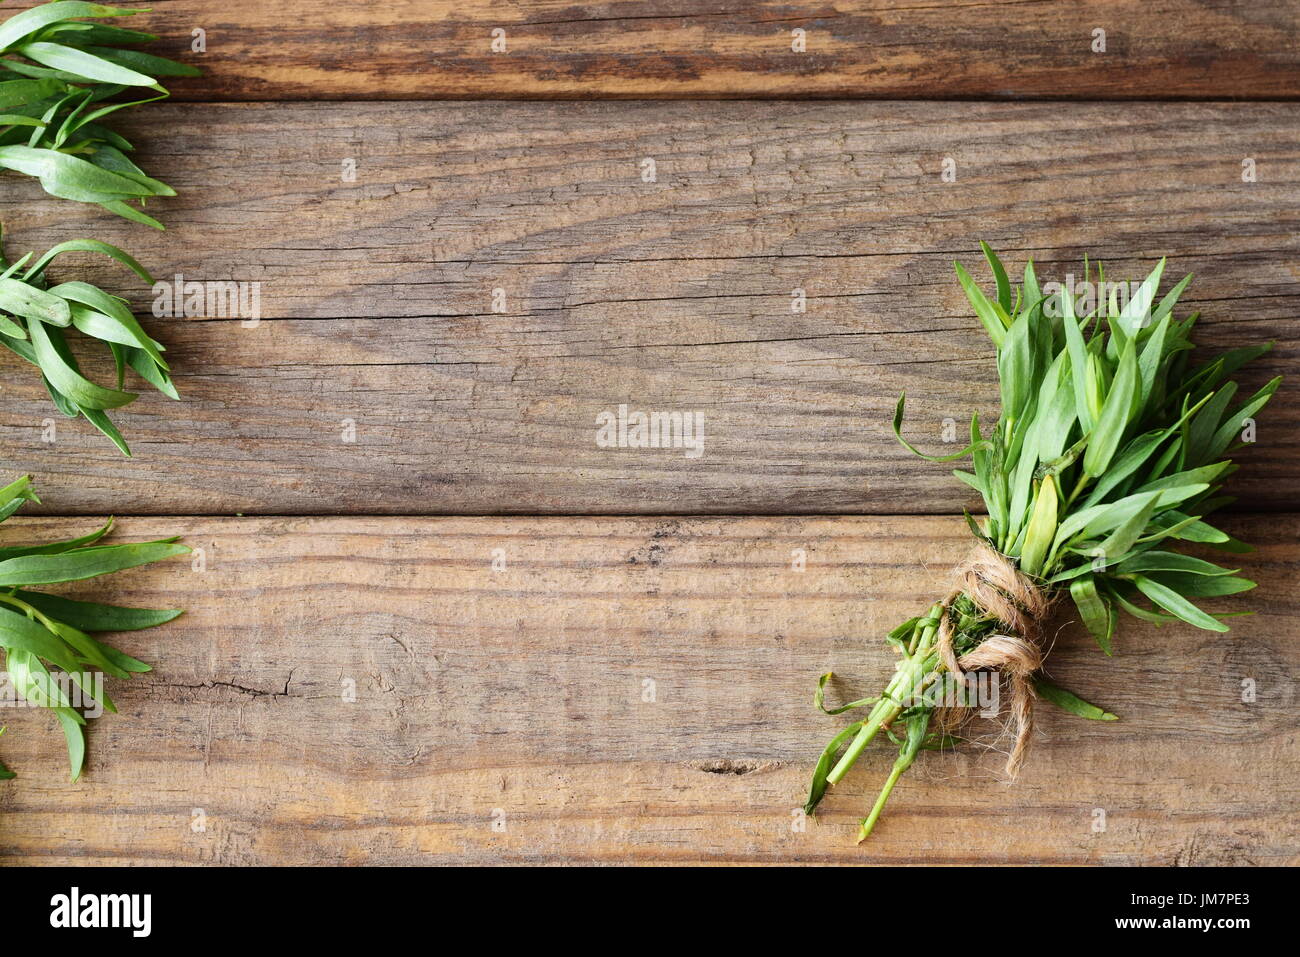 Bunch of fresh tarragon on a wooden background with a space for note Stock Photo